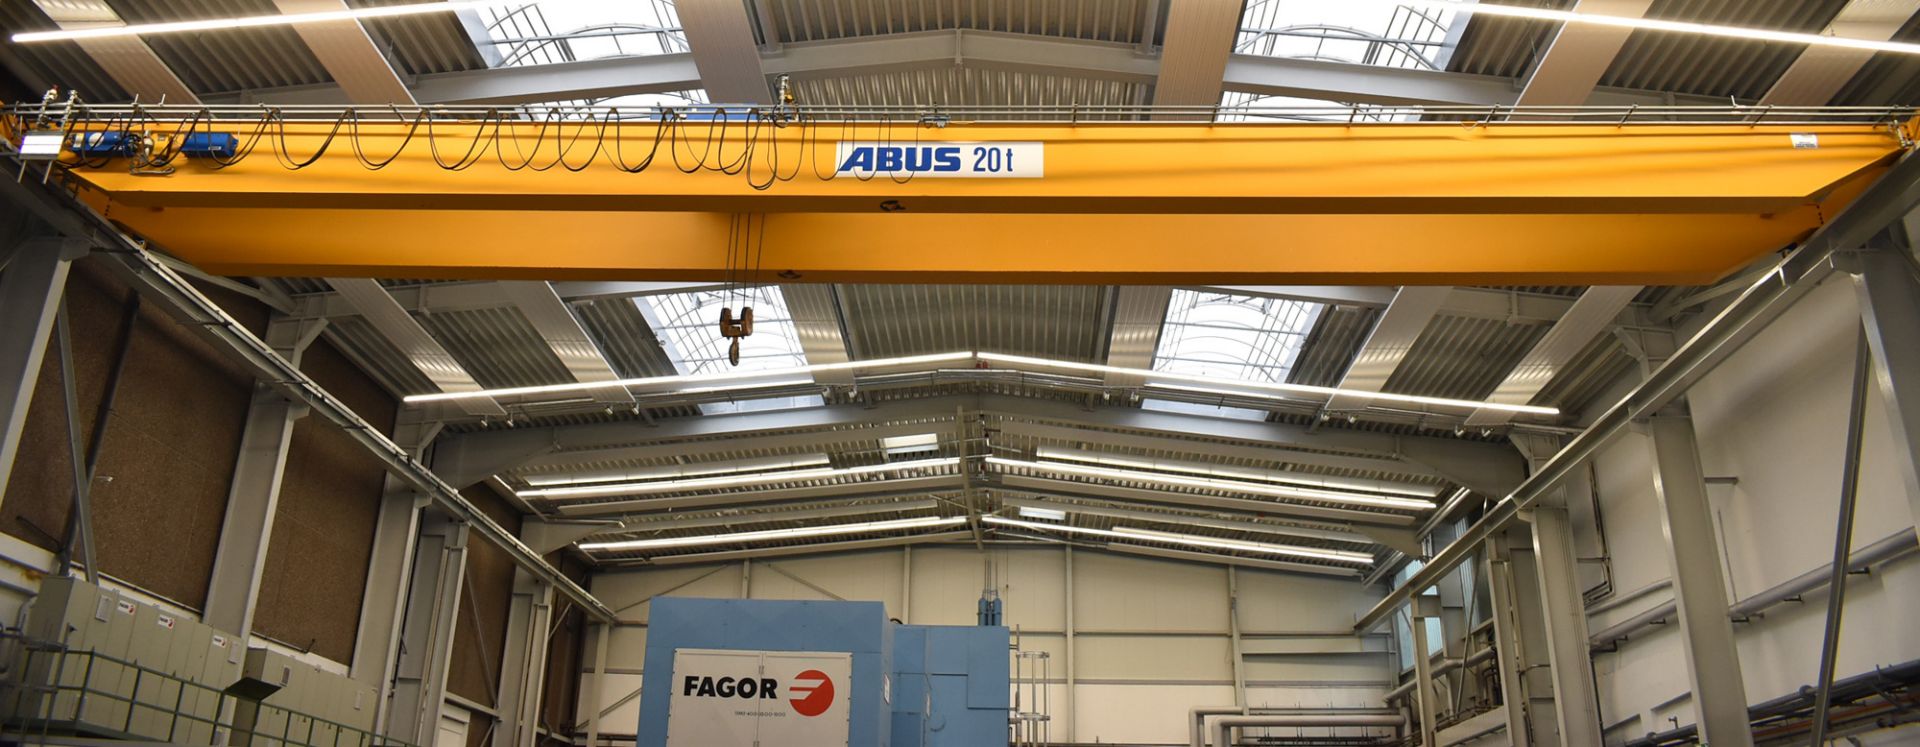 ABUS (2018) 20 TON CAPACITY DOUBLE GIRDER TOP RUNNING OVERHEAD CRANE WITH 24.75 M SPAN, 9.5 M HEIGHT - Image 5 of 10